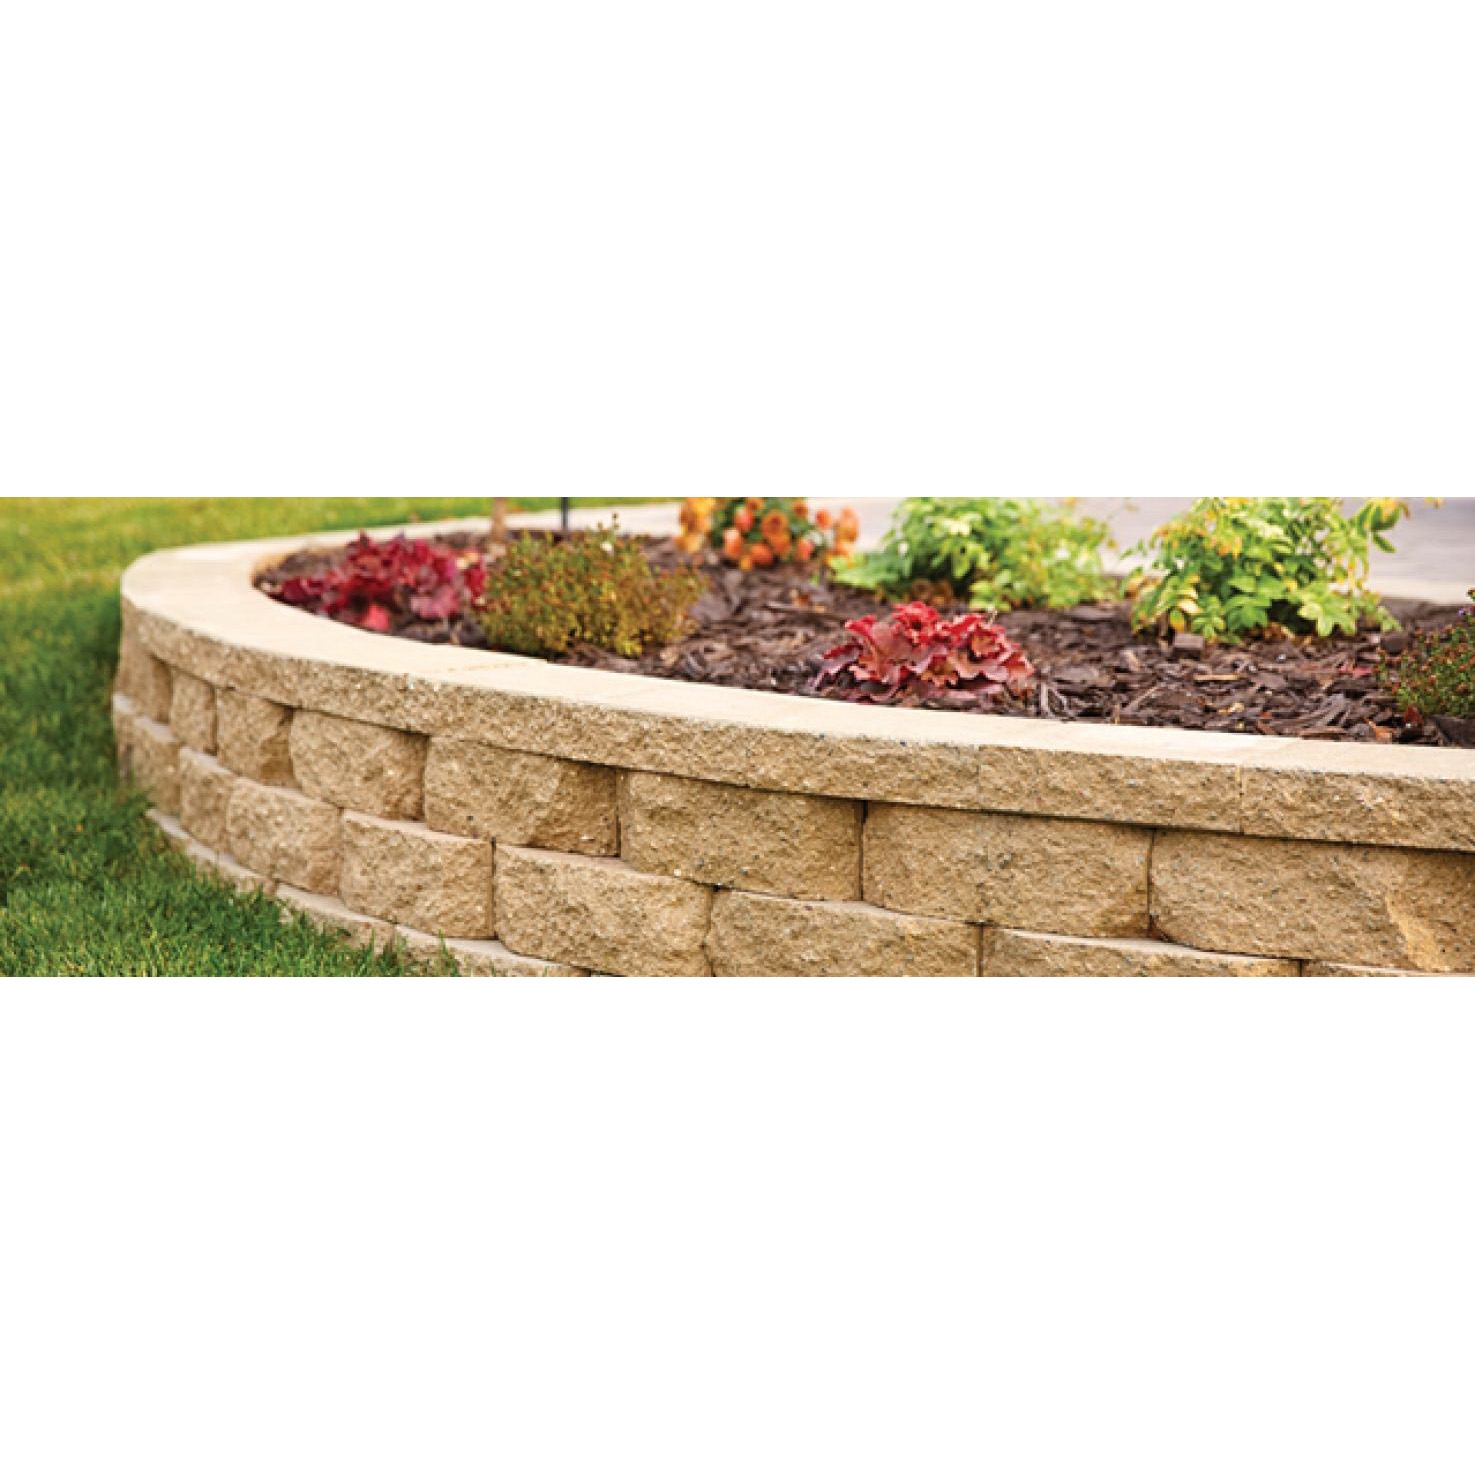 BASALITE 100065808 Retaining Wall System, 11-5/8 in L, 7 in W, 4 in H, Traditional Face, Tan - 2